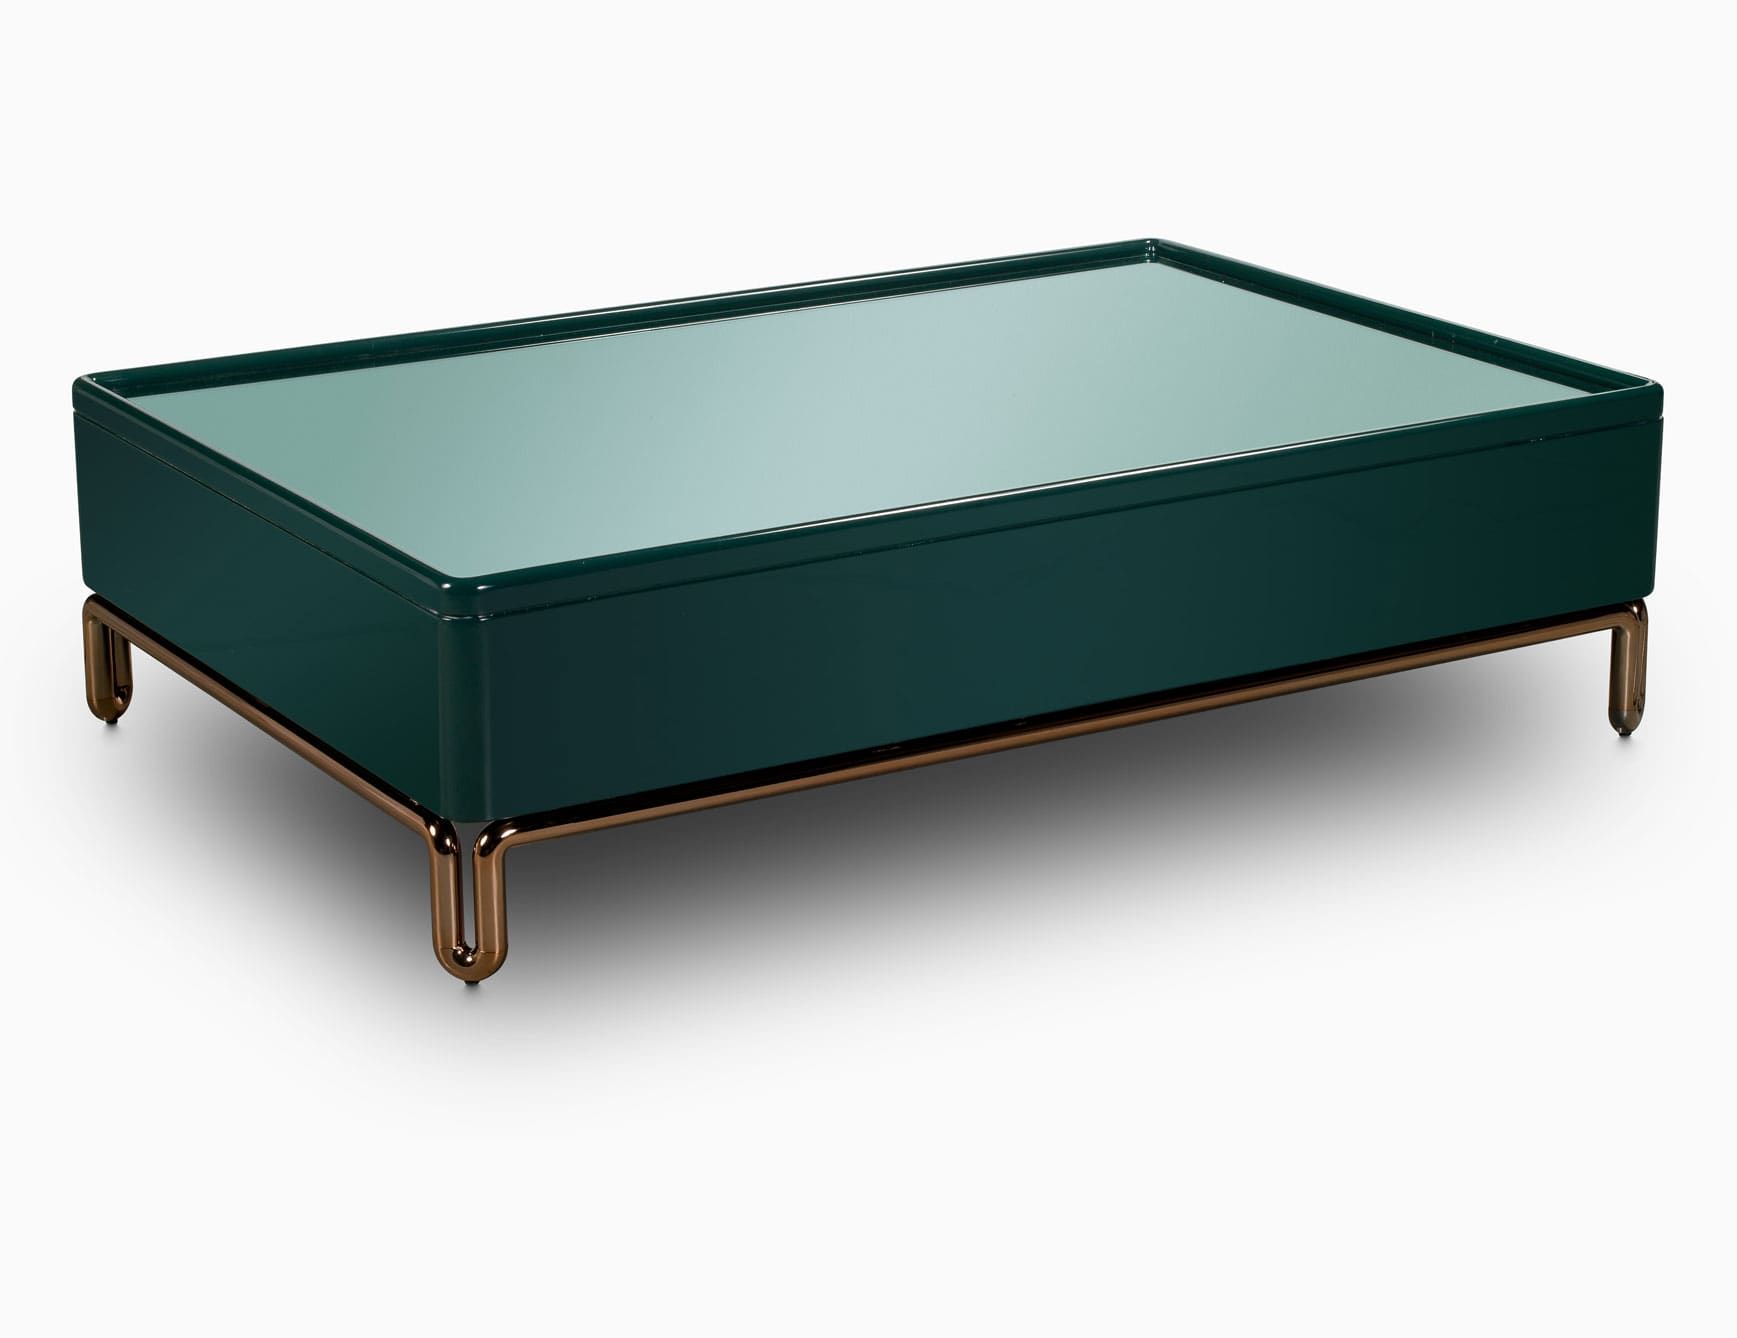 Pipe contemporary Italian coffee table with green lacquered wood